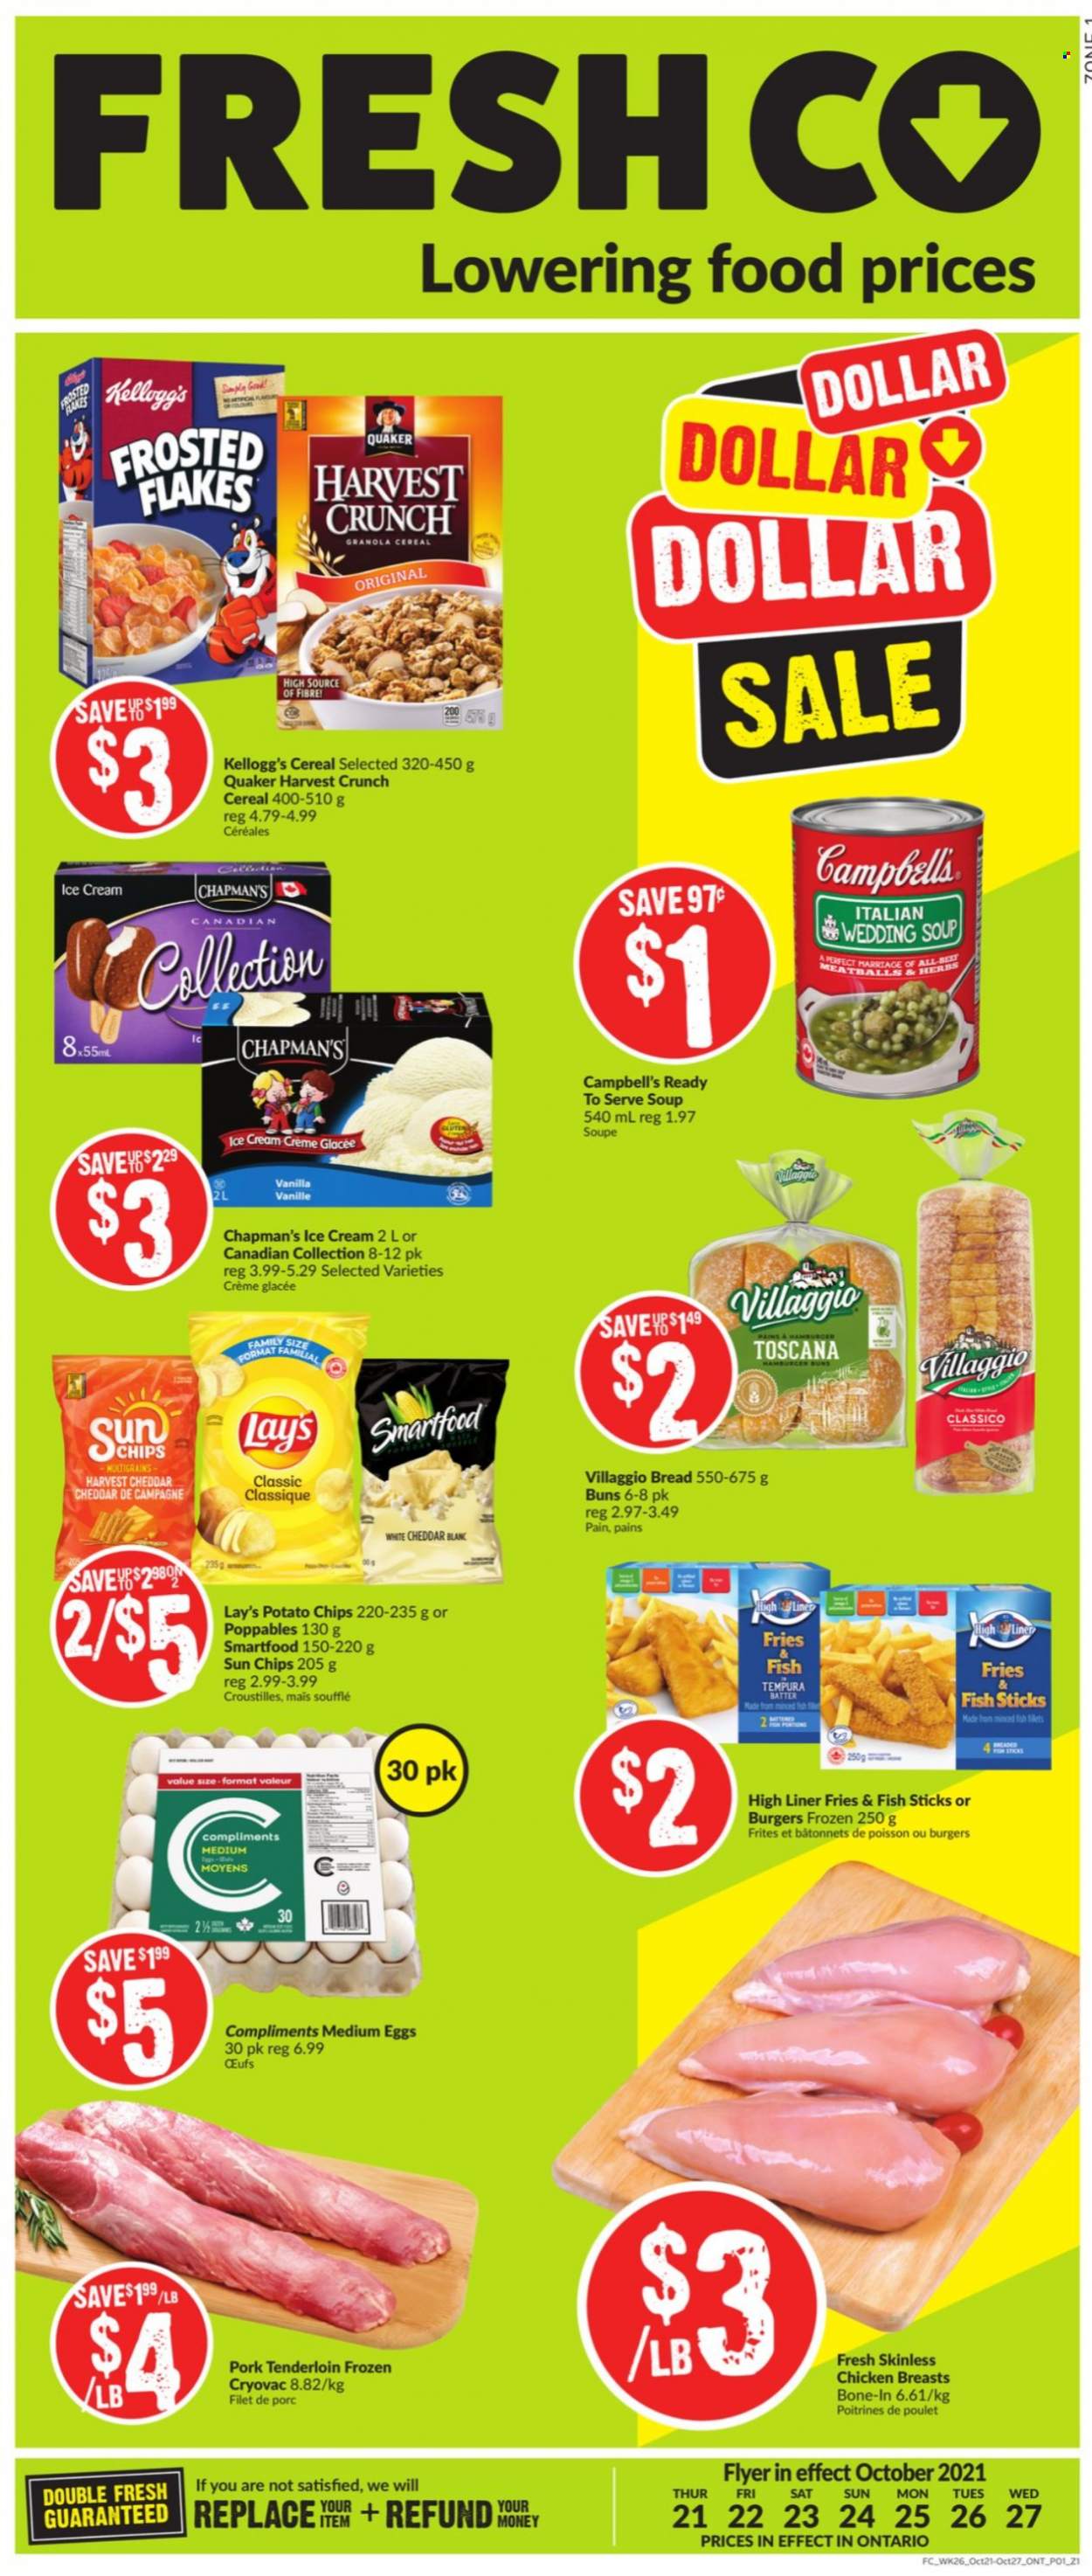 thumbnail - FreshCo. Flyer - October 21, 2021 - October 27, 2021 - Sales products - bread, buns, soufflés, Campbell's, meatballs, soup, Quaker, fish sticks, ready meal, chicken breasts, cheese, eggs, ice cream, potato fries, Kellogg's, potato chips, Lay’s, Smartfood, salty snack, cereals, granola, Frosted Flakes, Classico, pork meat, pork tenderloin. Page 1.